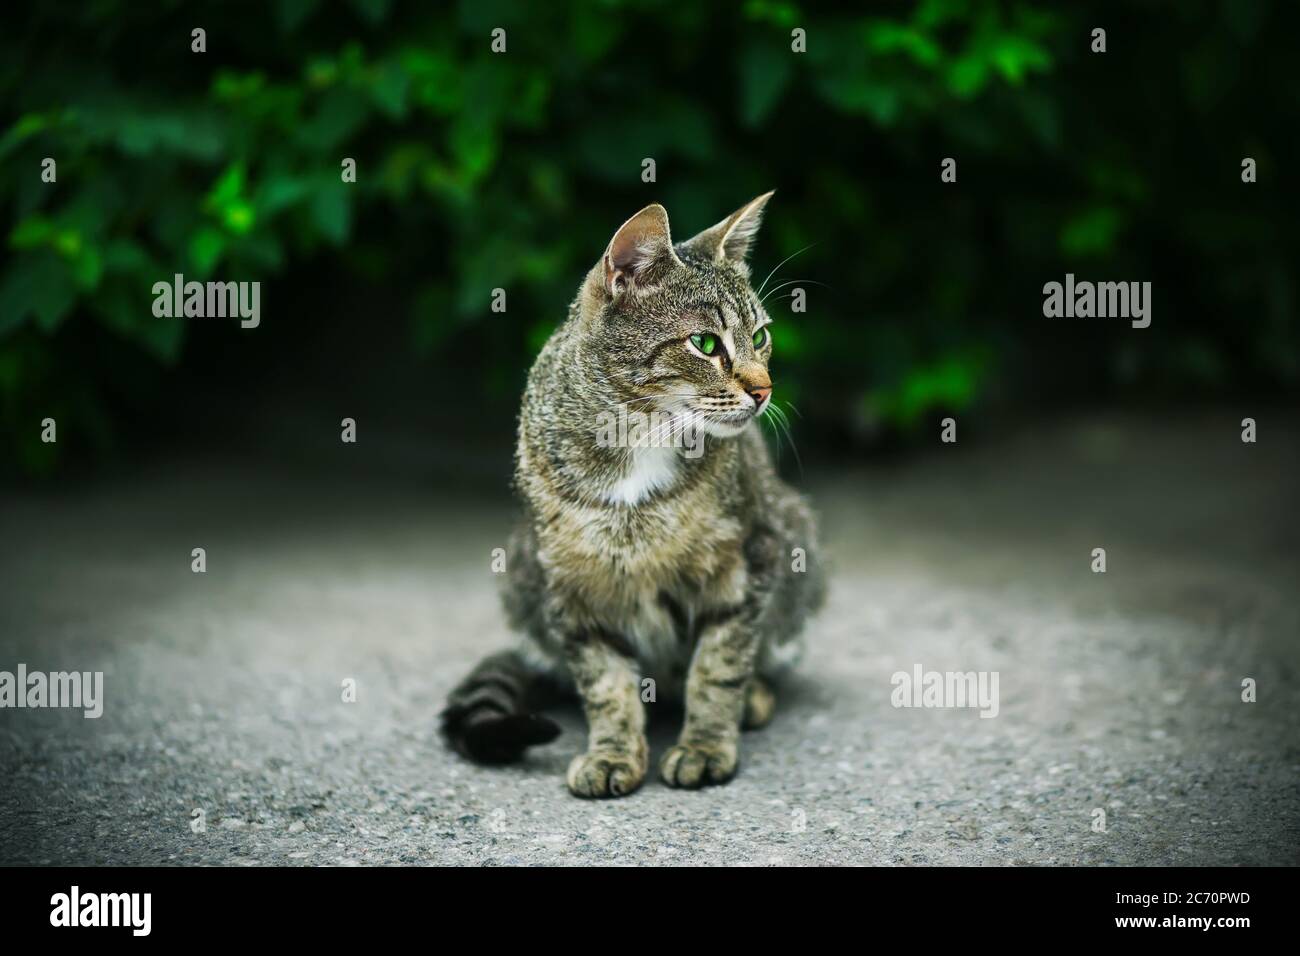 A beautiful striped wild cat with bright green eyes sits against a background of dark green foliage in the summer. Stock Photo